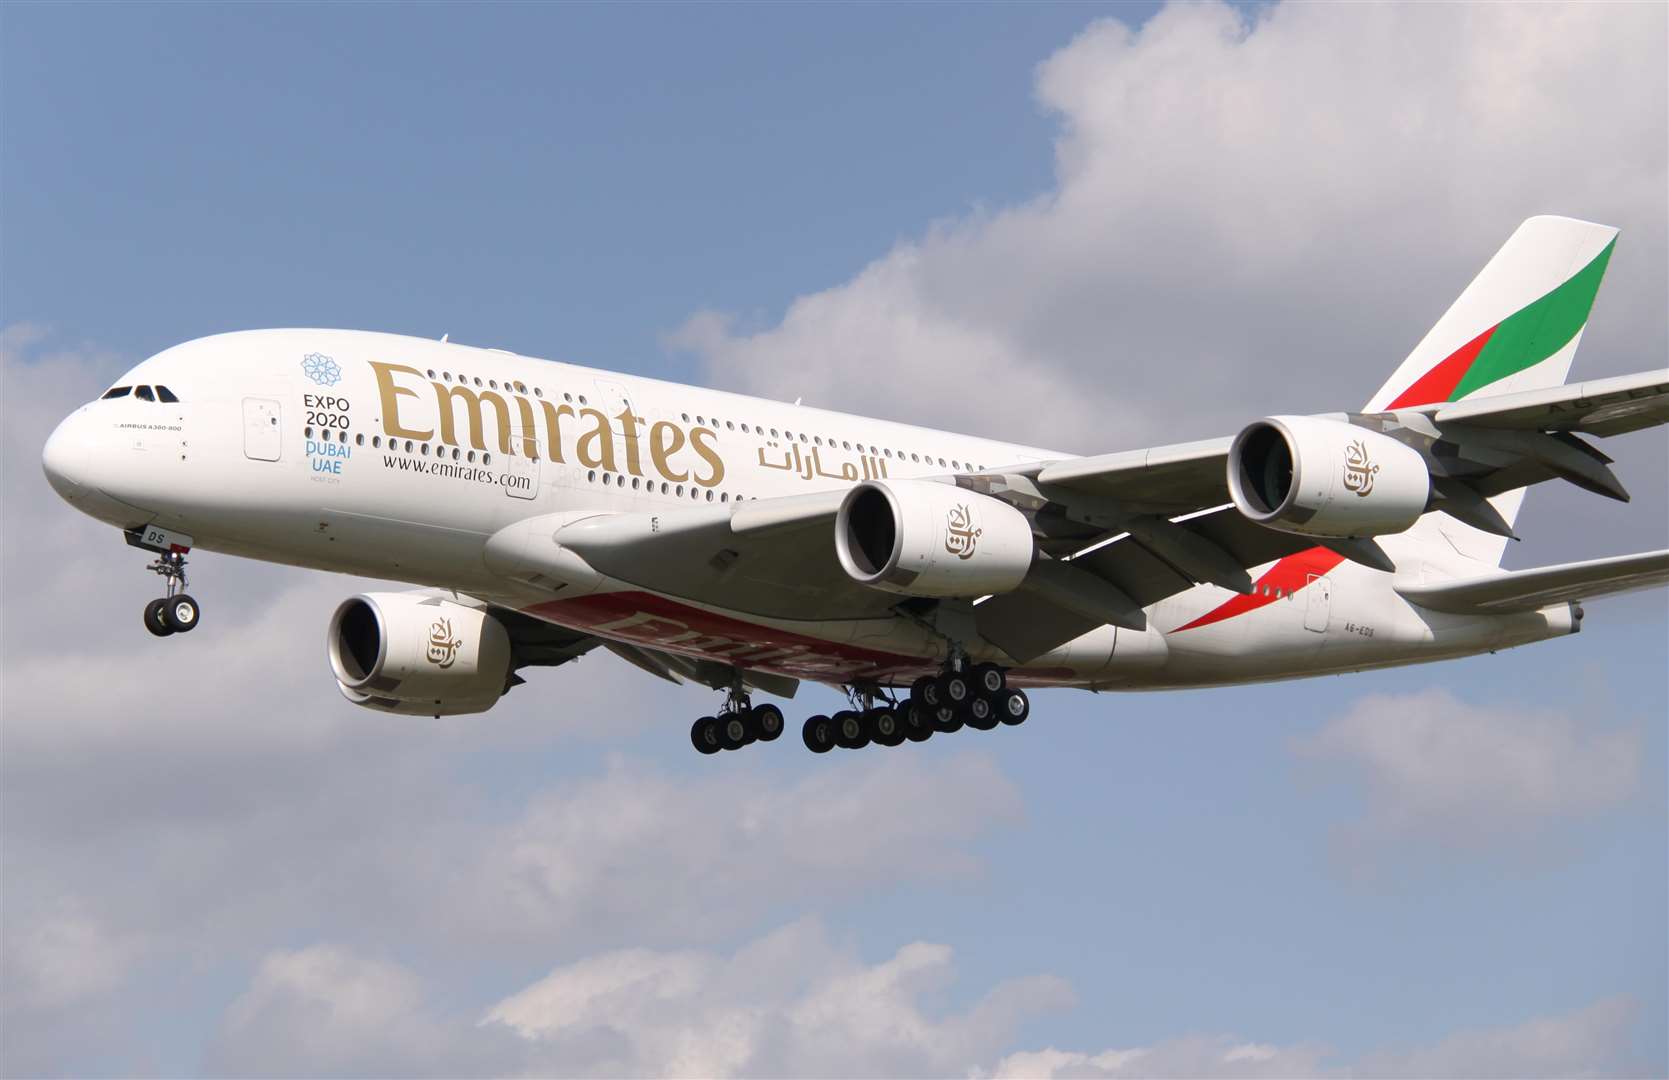 Ellie Holman was detained after taking an Emirates flight to Dubai